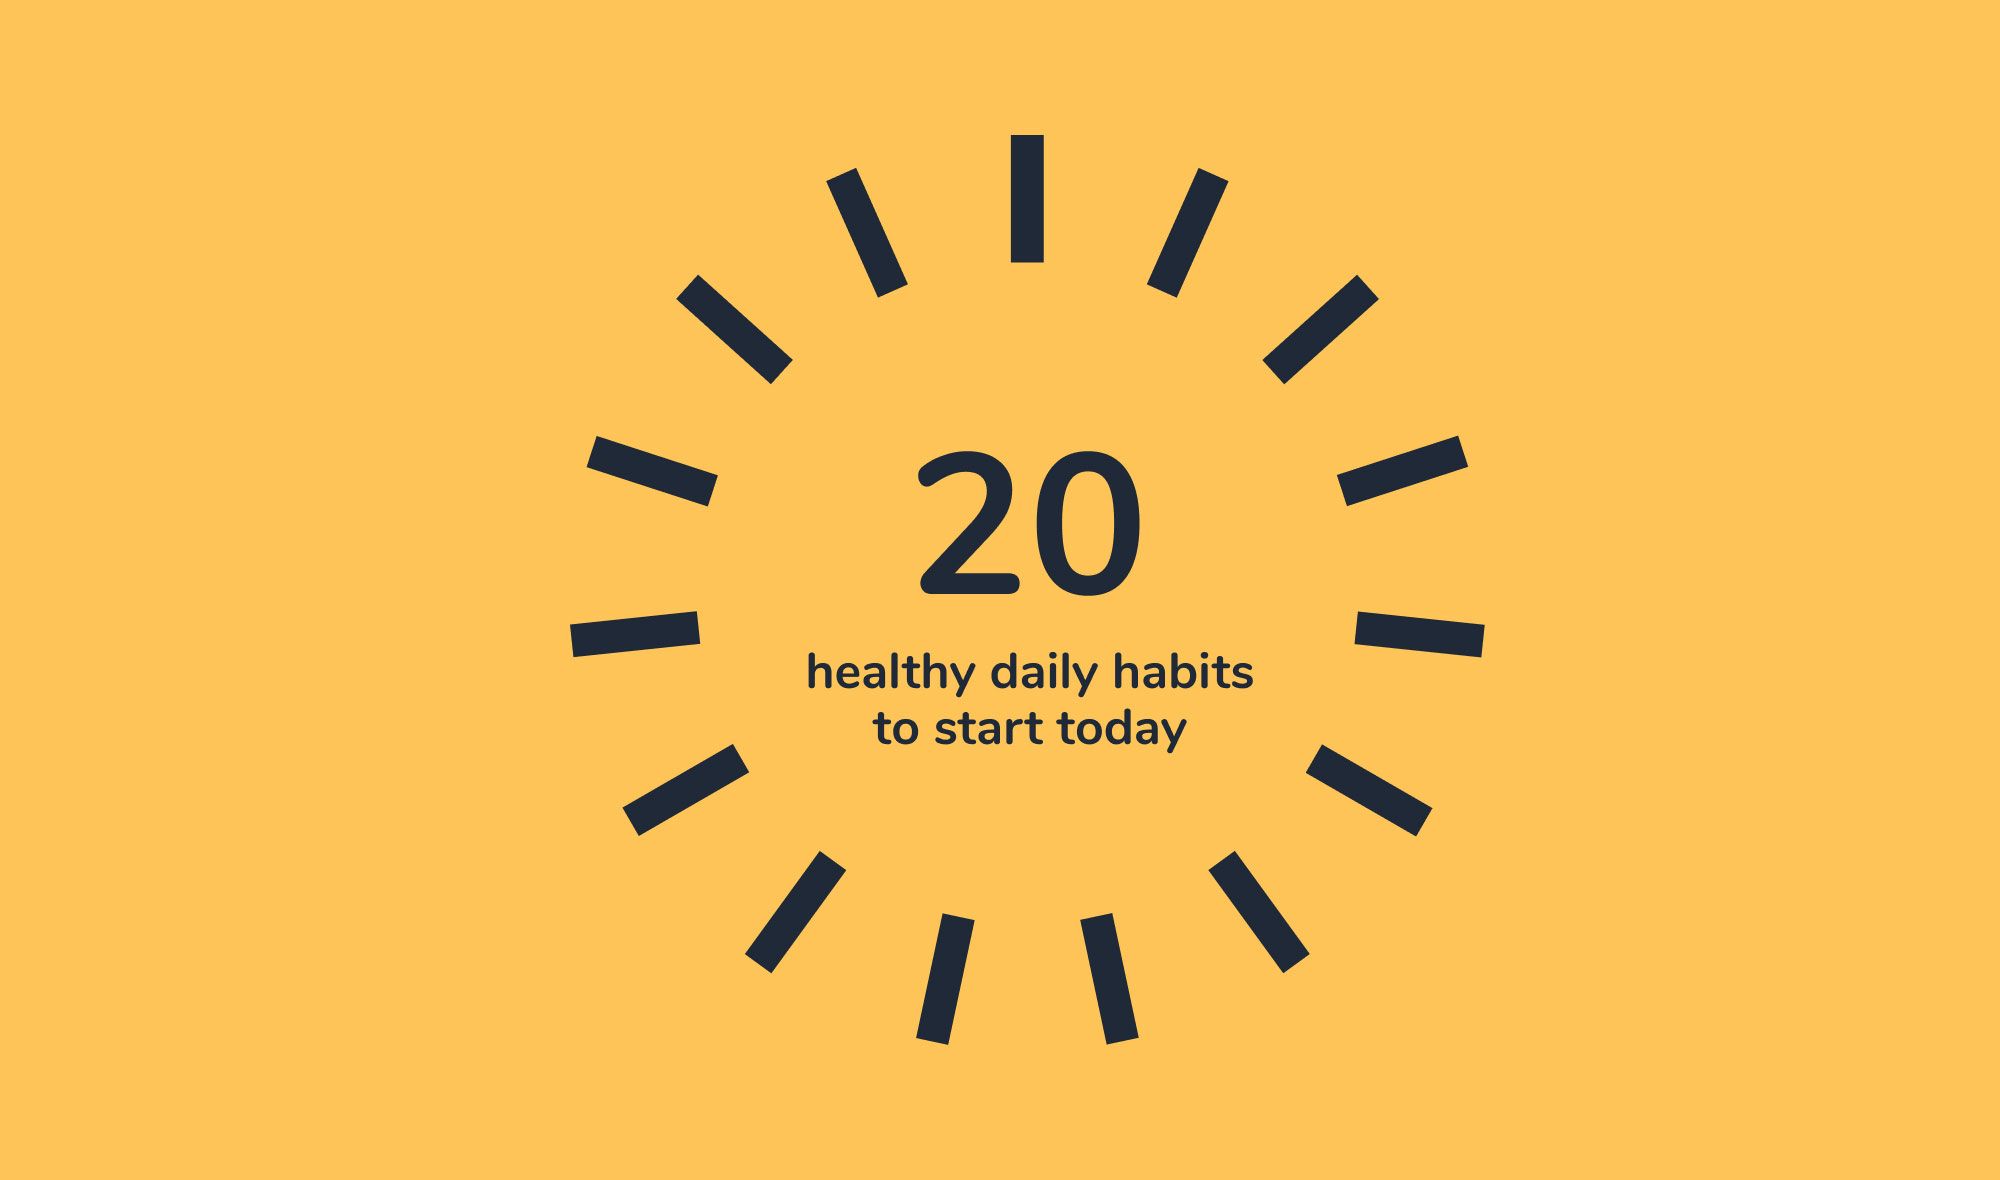 Habits to track - 20 healthy daily habits to start today